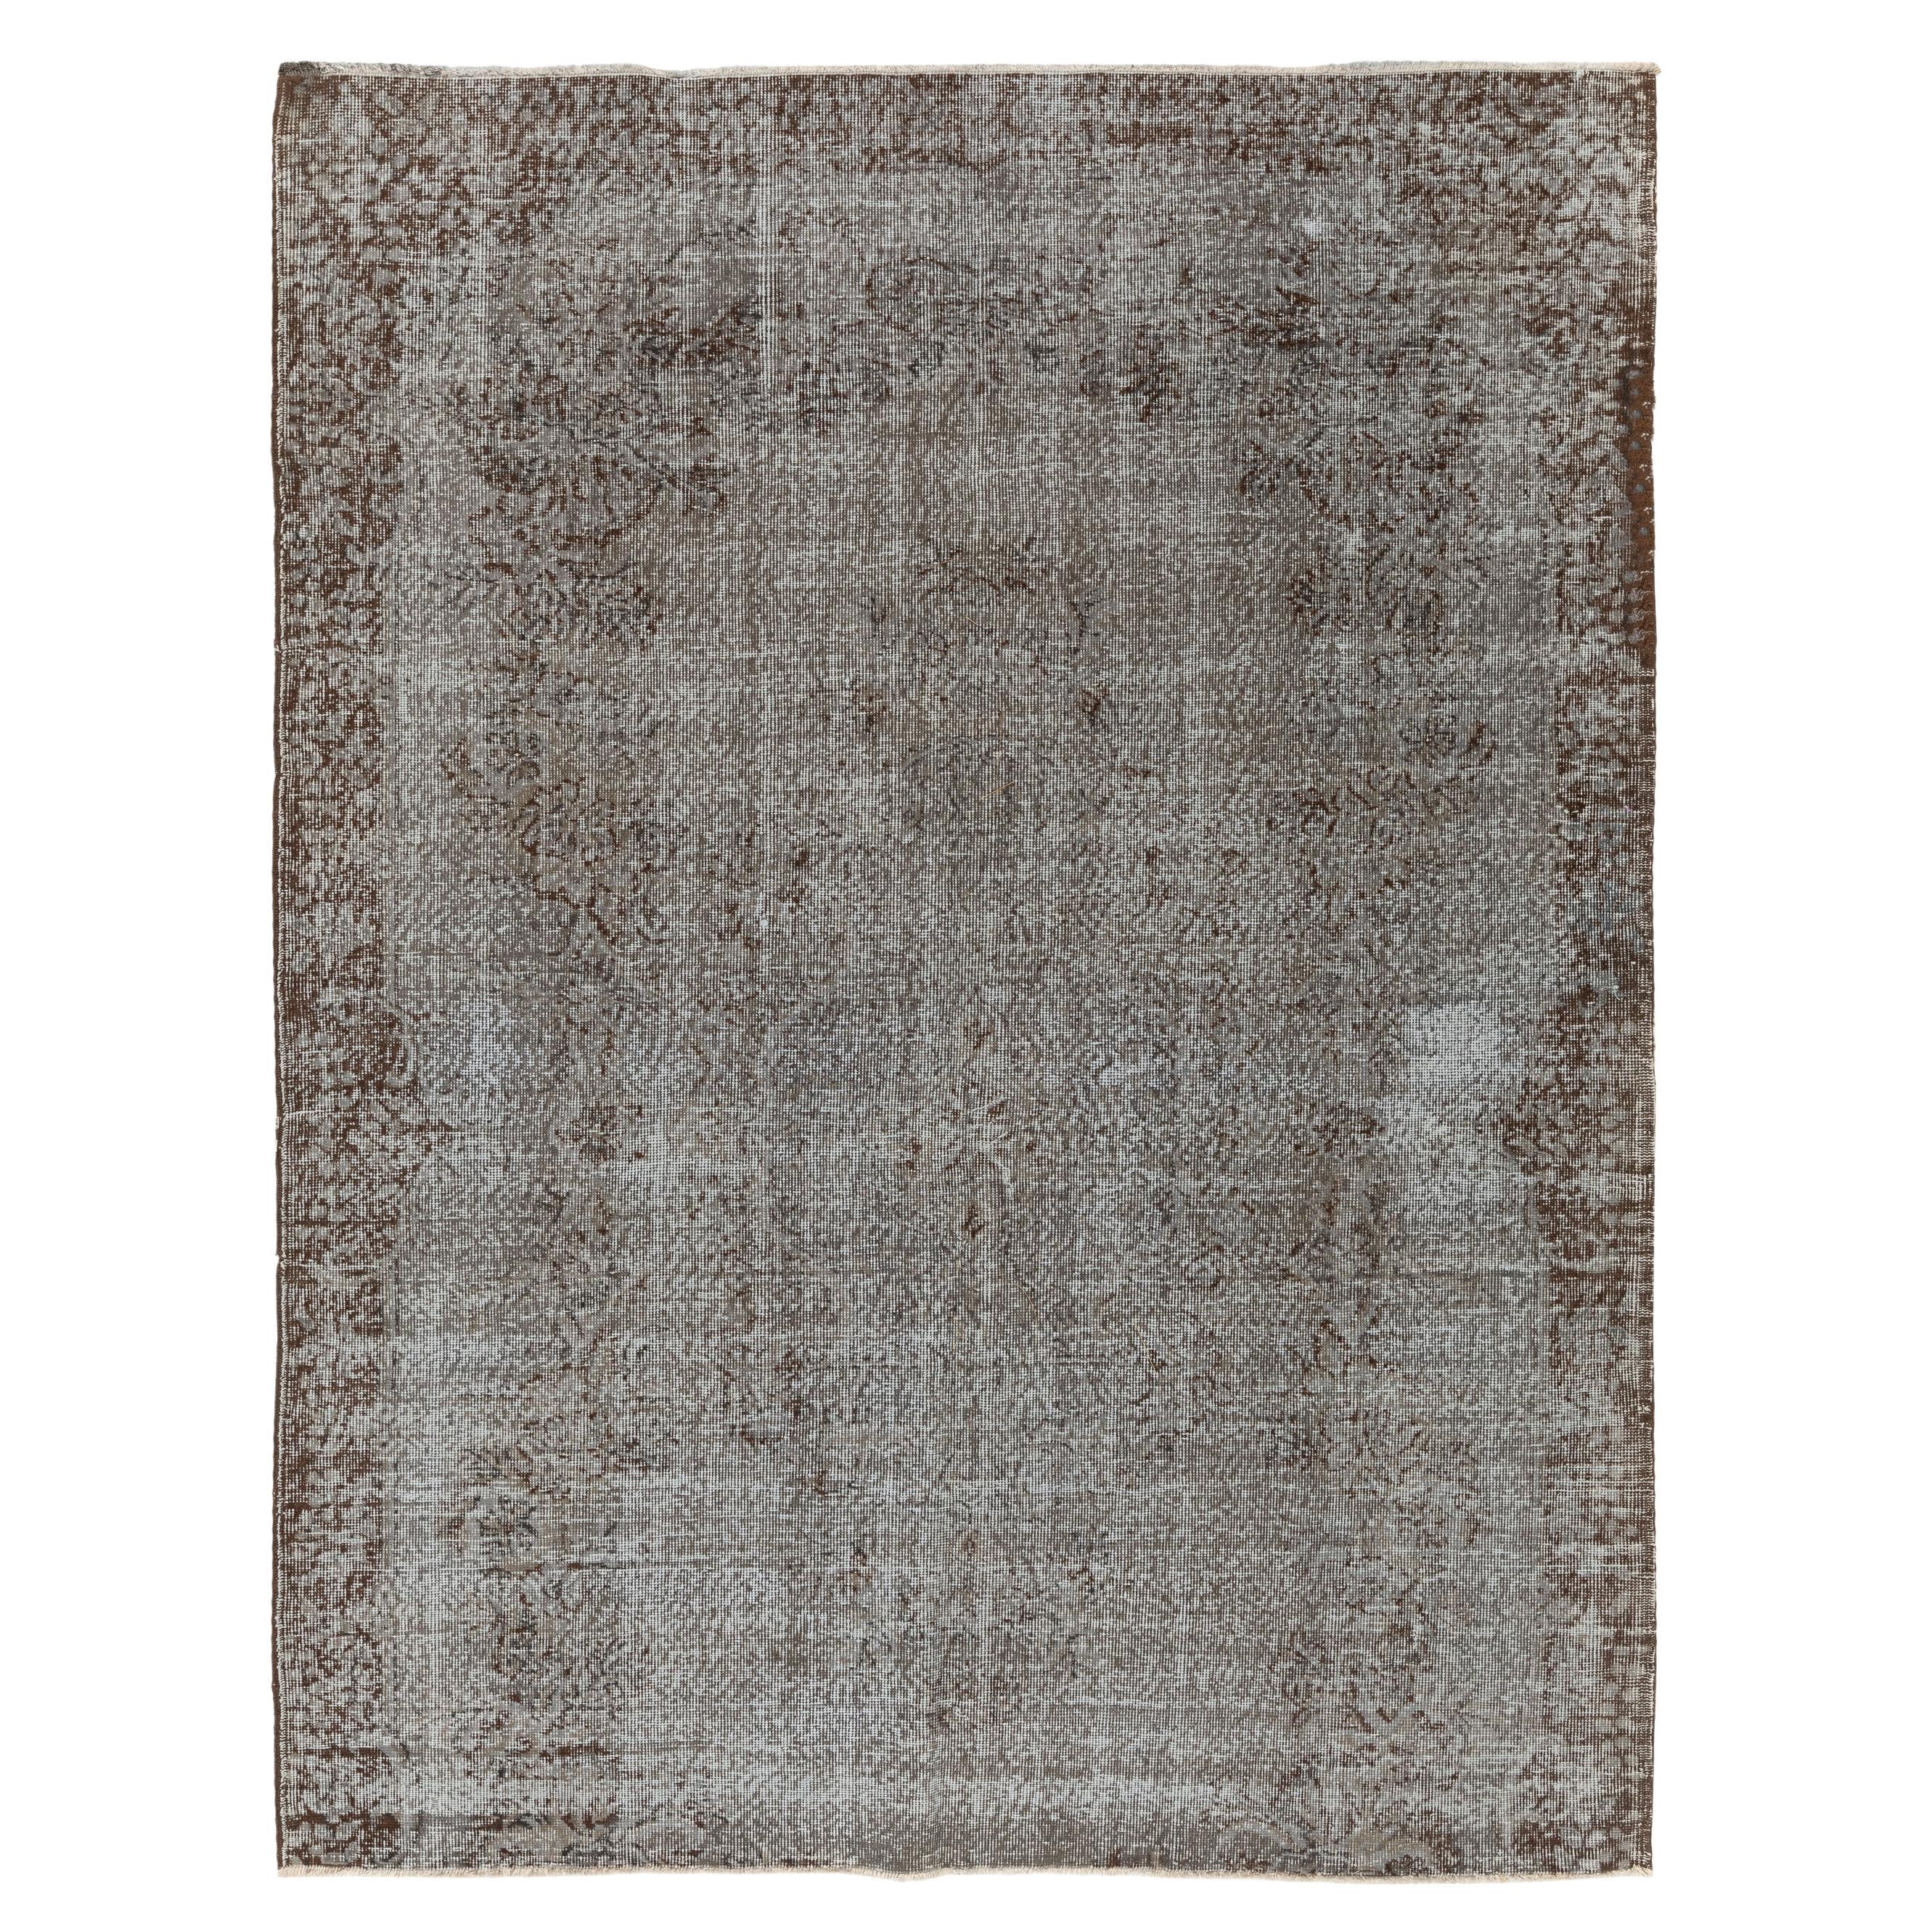 6.3x8.2 Ft Distressed Handmade Turkish Rug in Gray, Vintage Shabby Chic Carpet